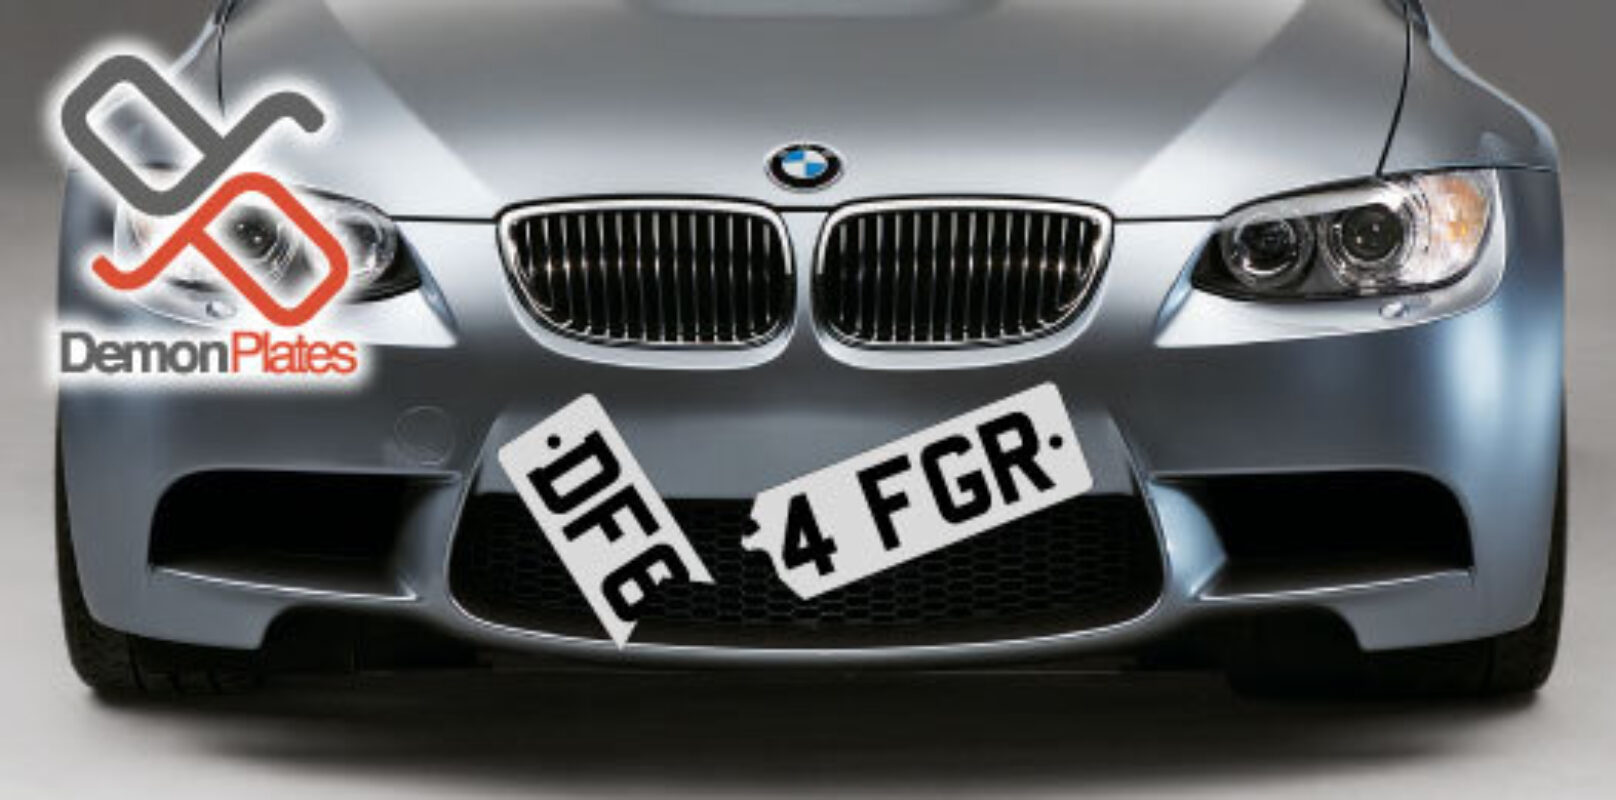 Replacement number plates